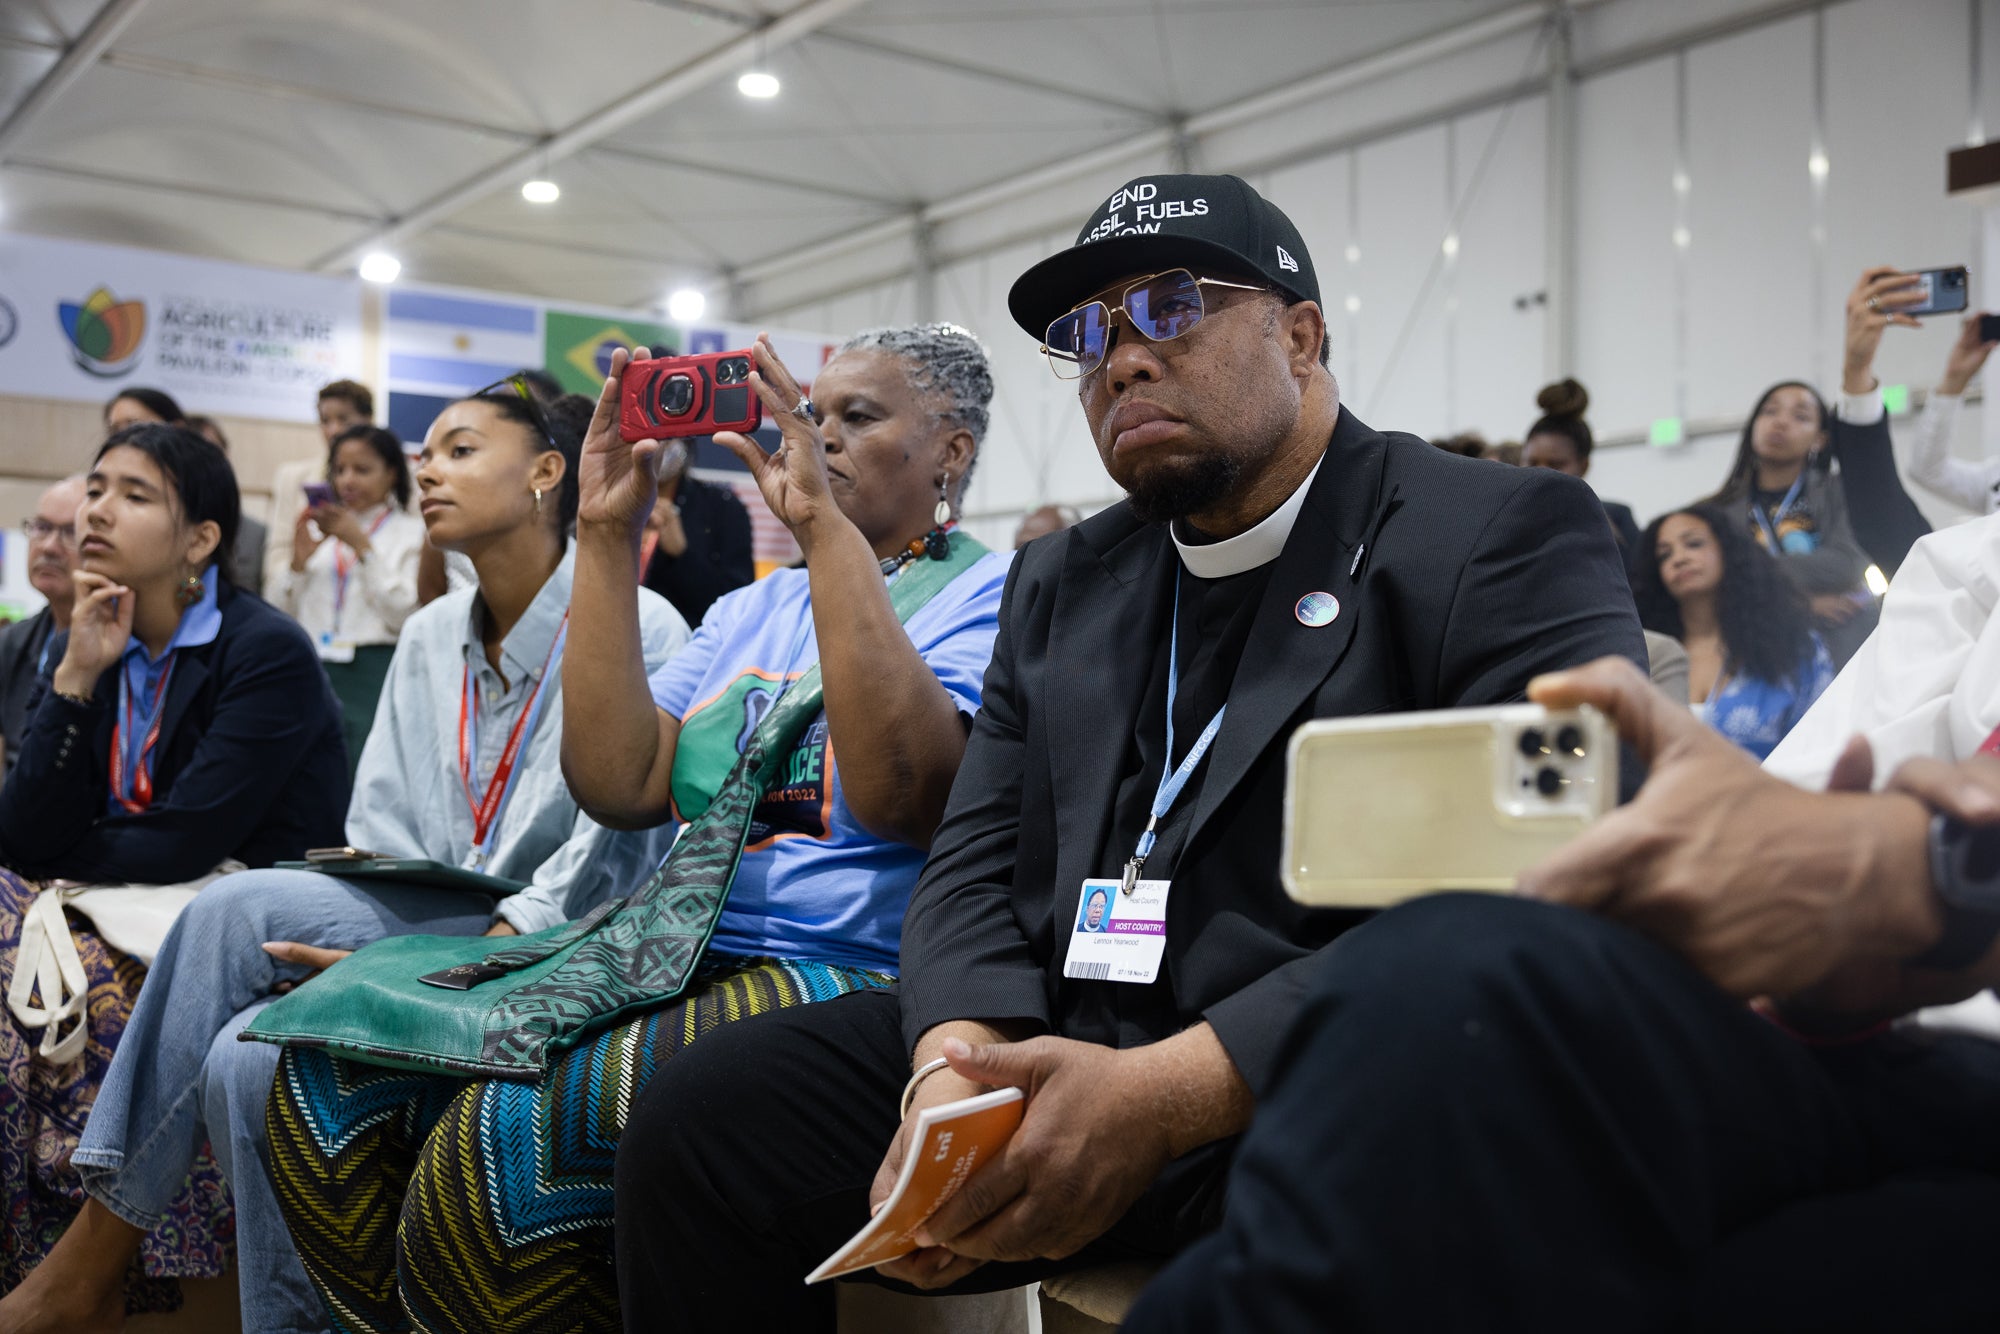 Rev. Lennox Yearwood, Jr., President of the Hip Hop Caucus, foreground, is among the audience as former U.S. Vice President Al Gore — founder of the Climate Reality Project — delivers an address at the Climate Justice Pavilion.